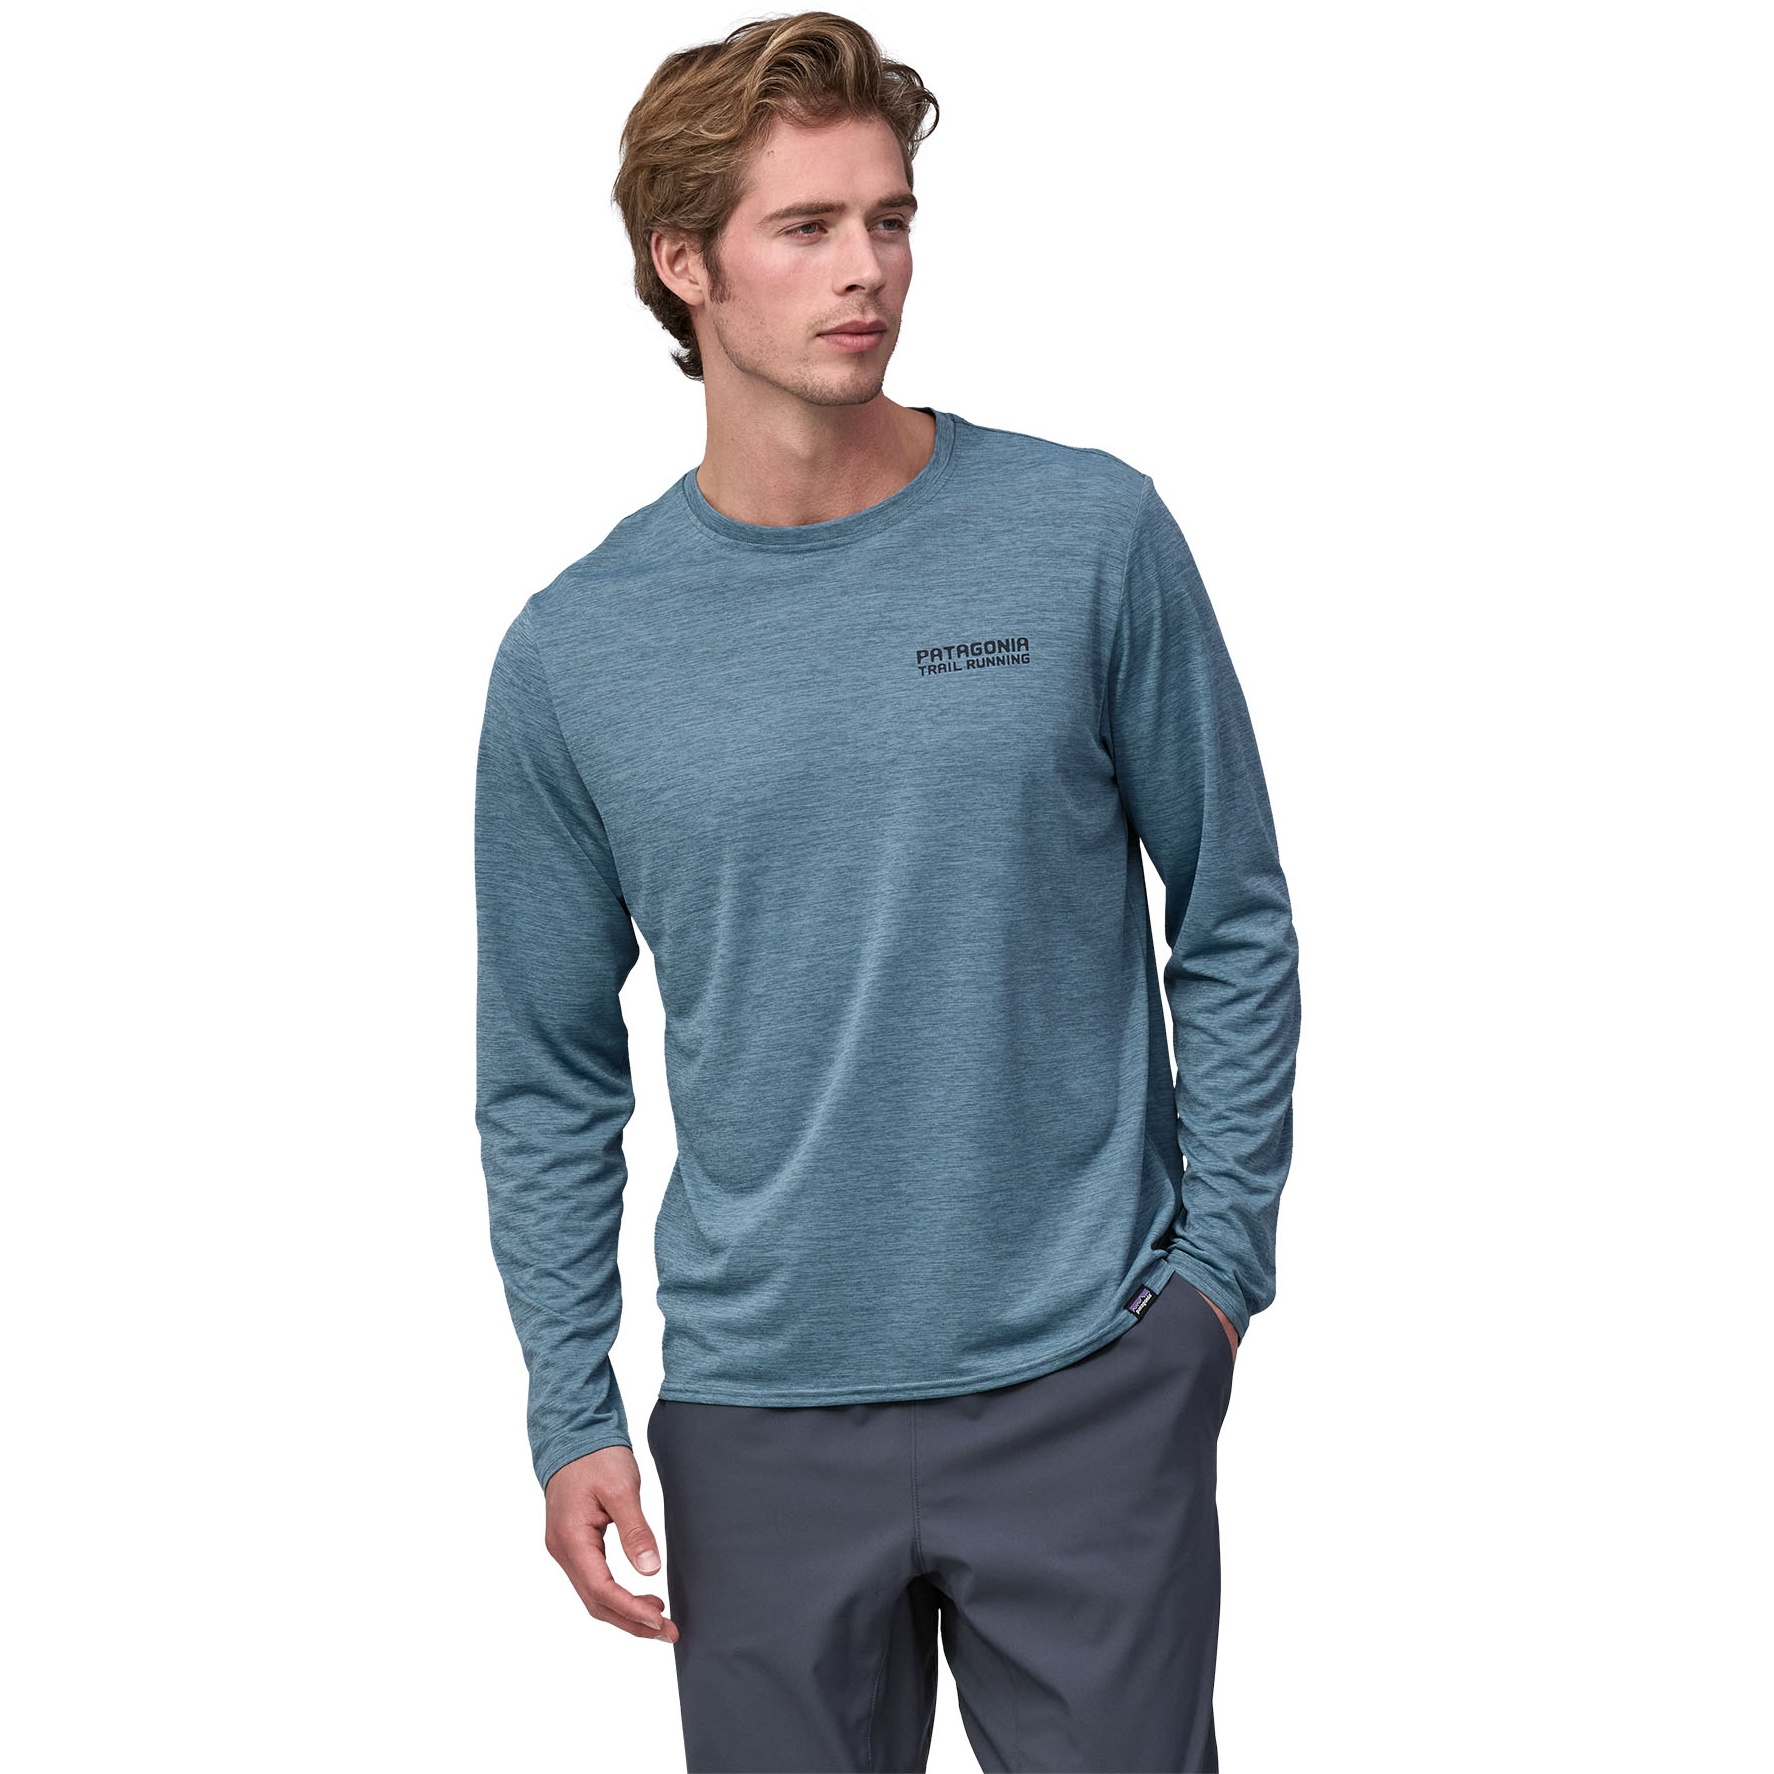 Picture of Patagonia Capilene Cool Daily Graphic Longsleeve Shirt Men - Lands - Tree Trotter: Utility Blue X-Dye